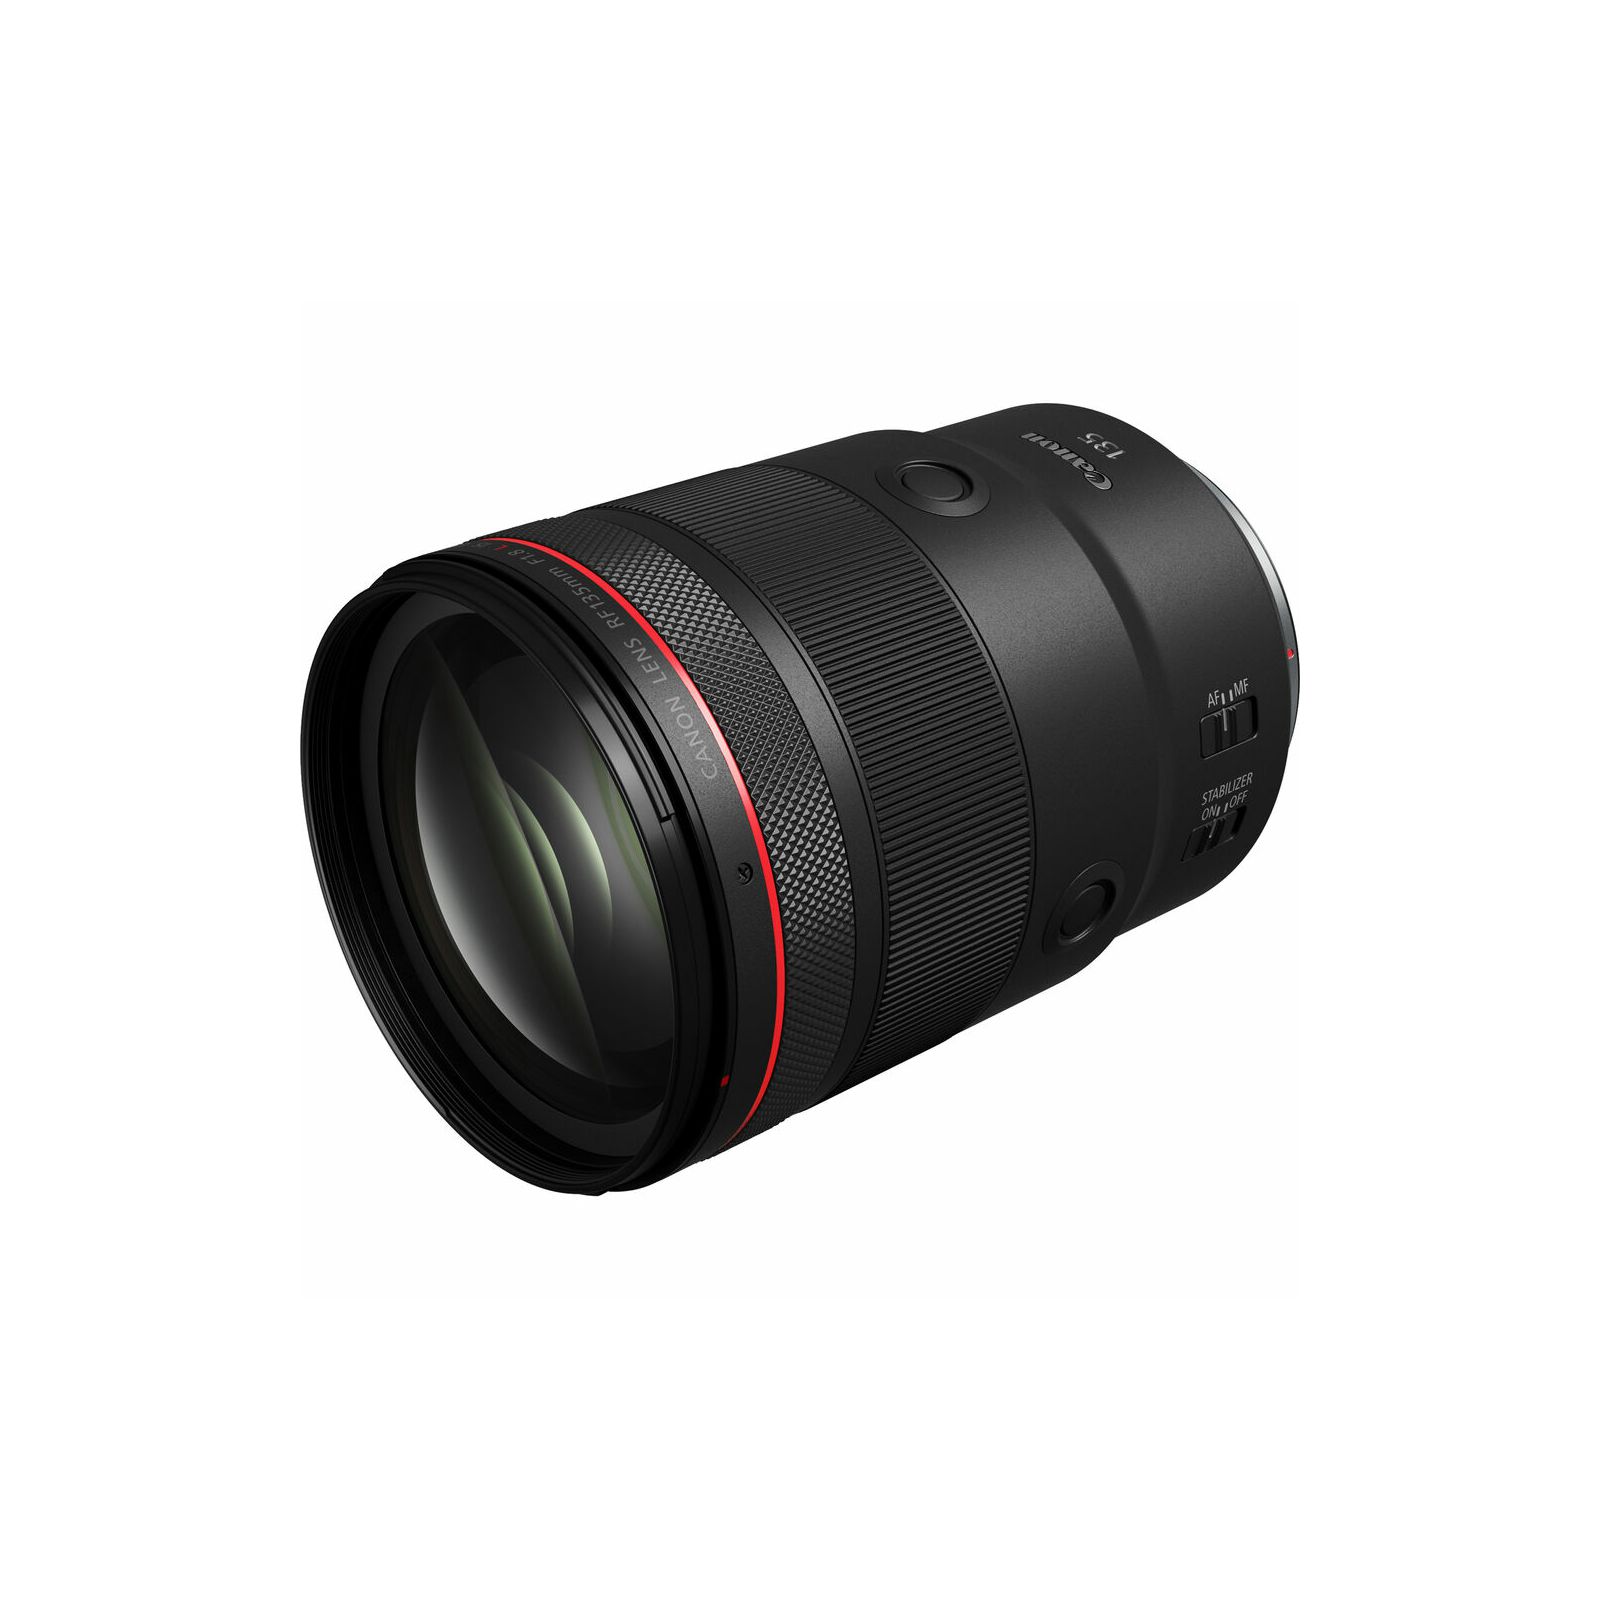 Canon RF 135mm f/1.8 L IS USM